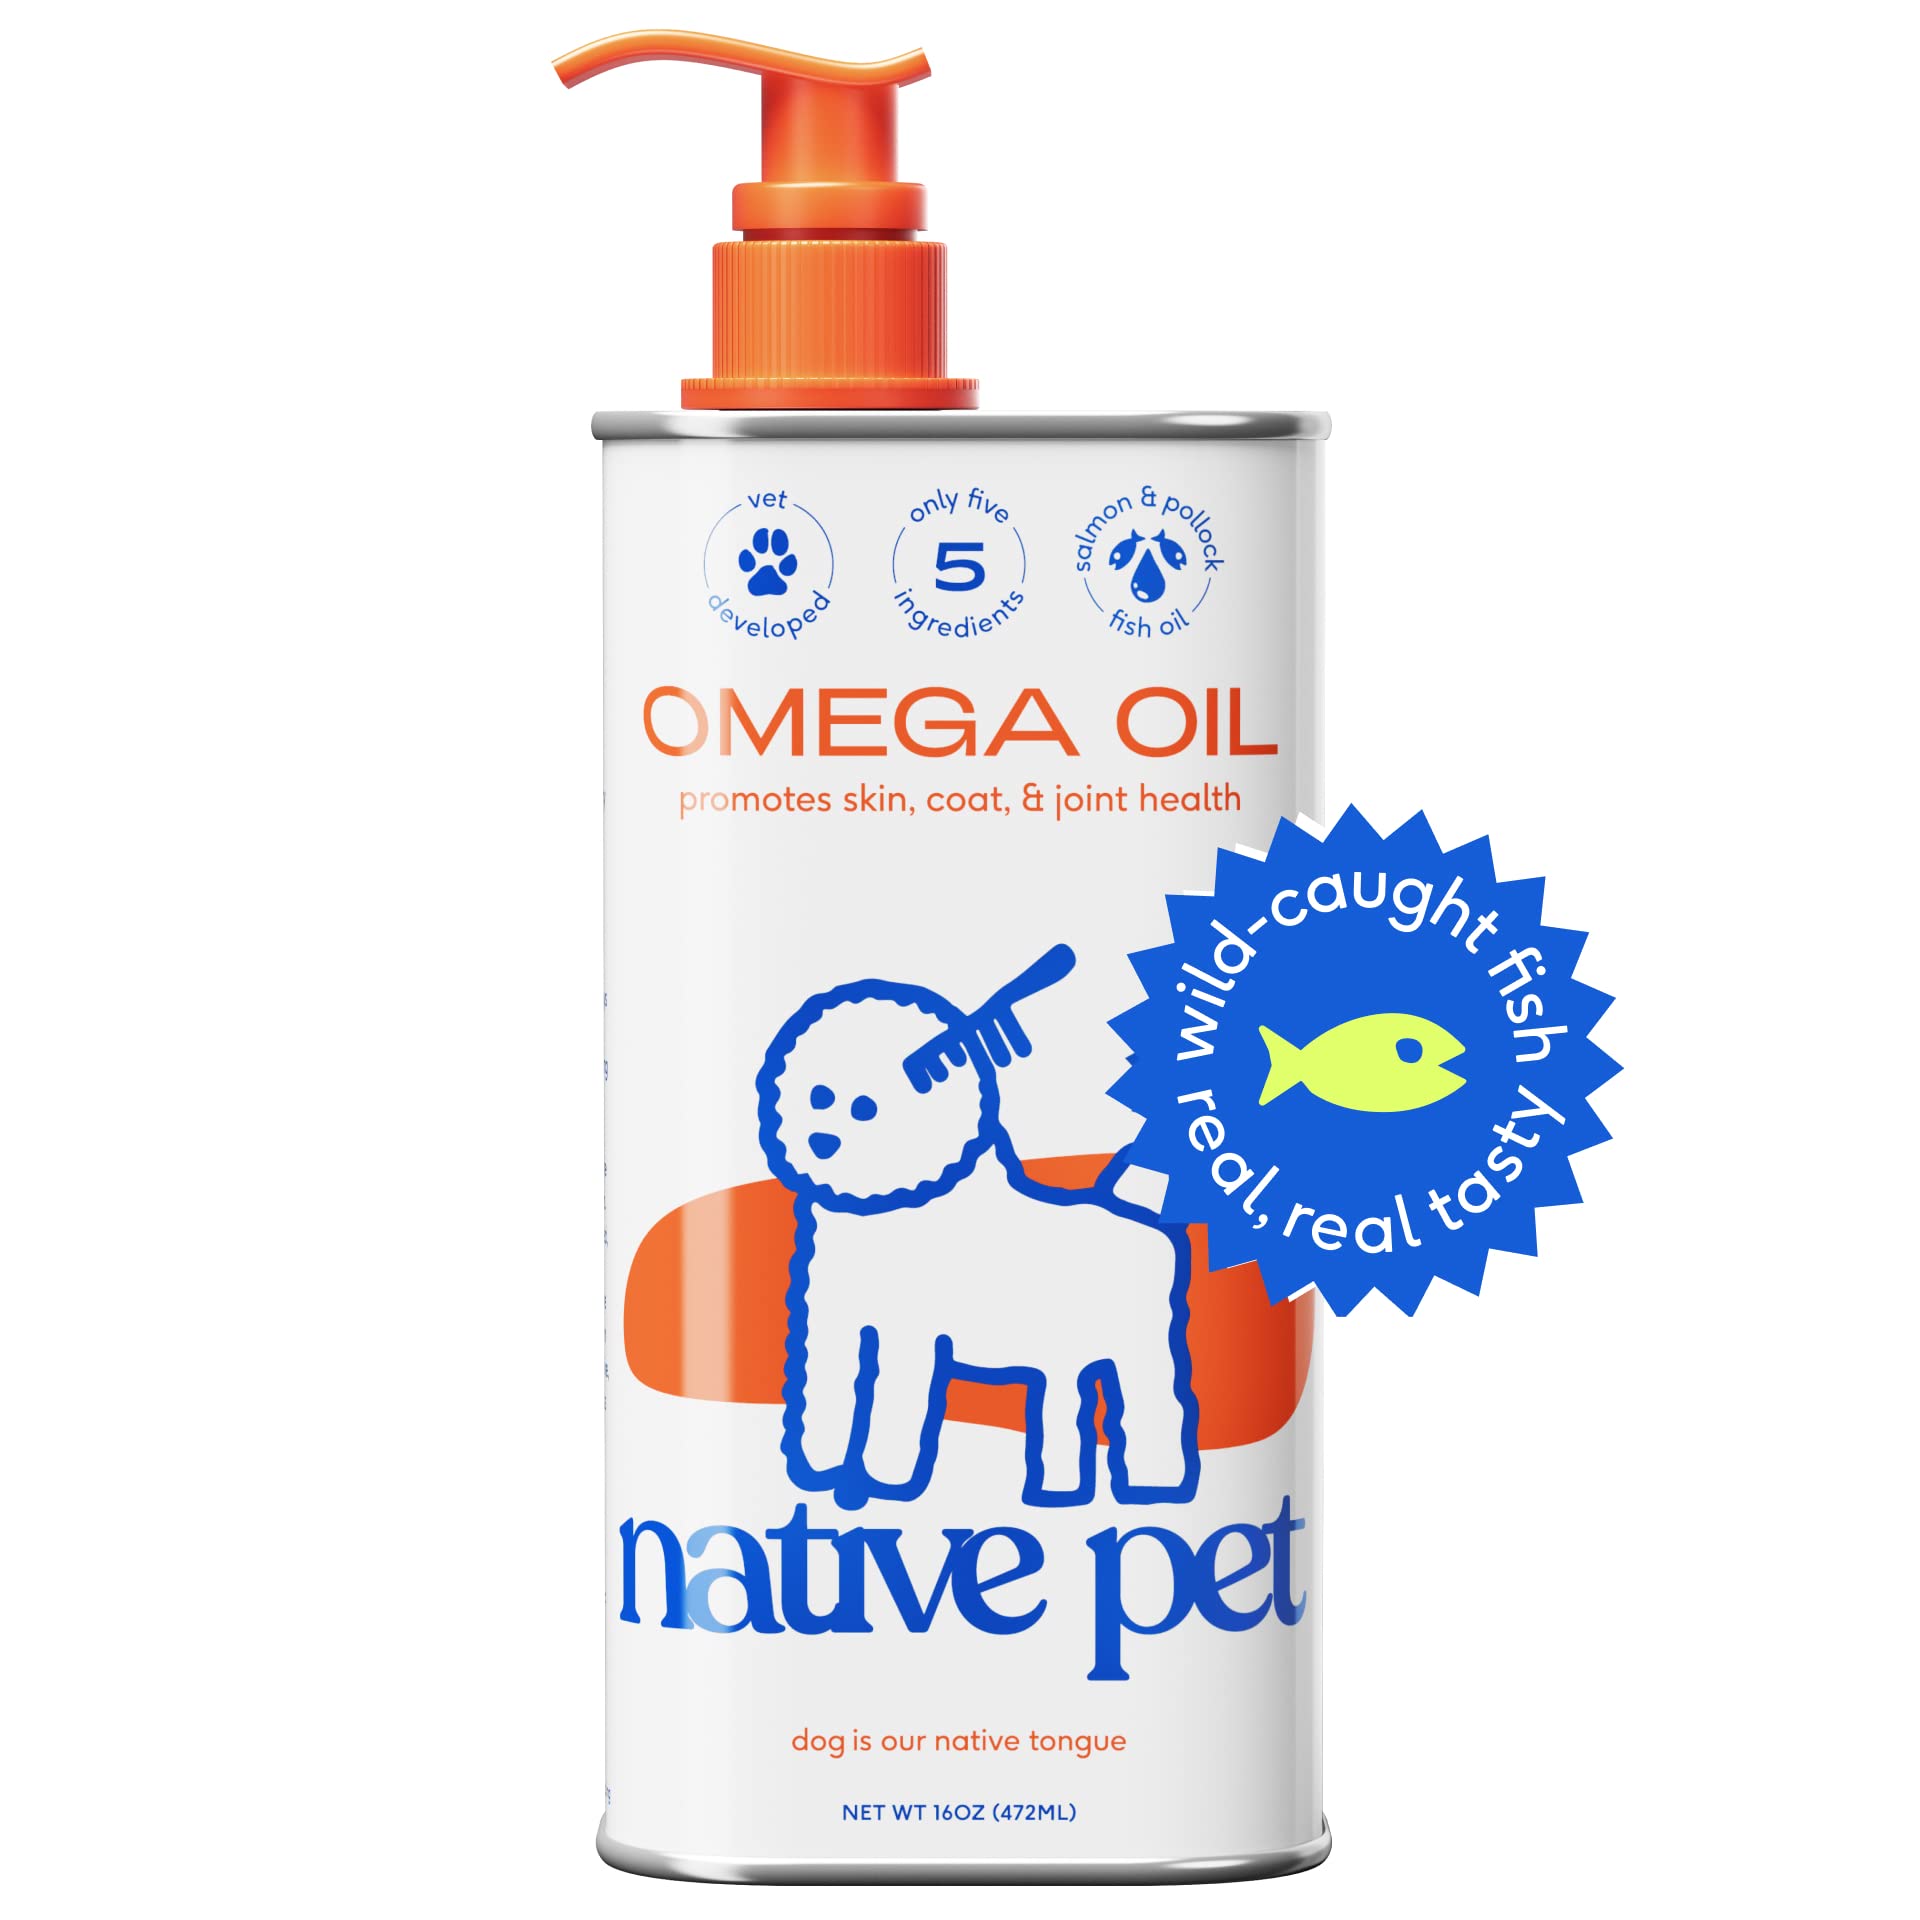 16-Oz Native Pet Omega 3 Fish Oil Liquid Supplements w/ Pump (Seafood) $10.74 w/ S&S + Free Shipping w/ Prime or on $35+